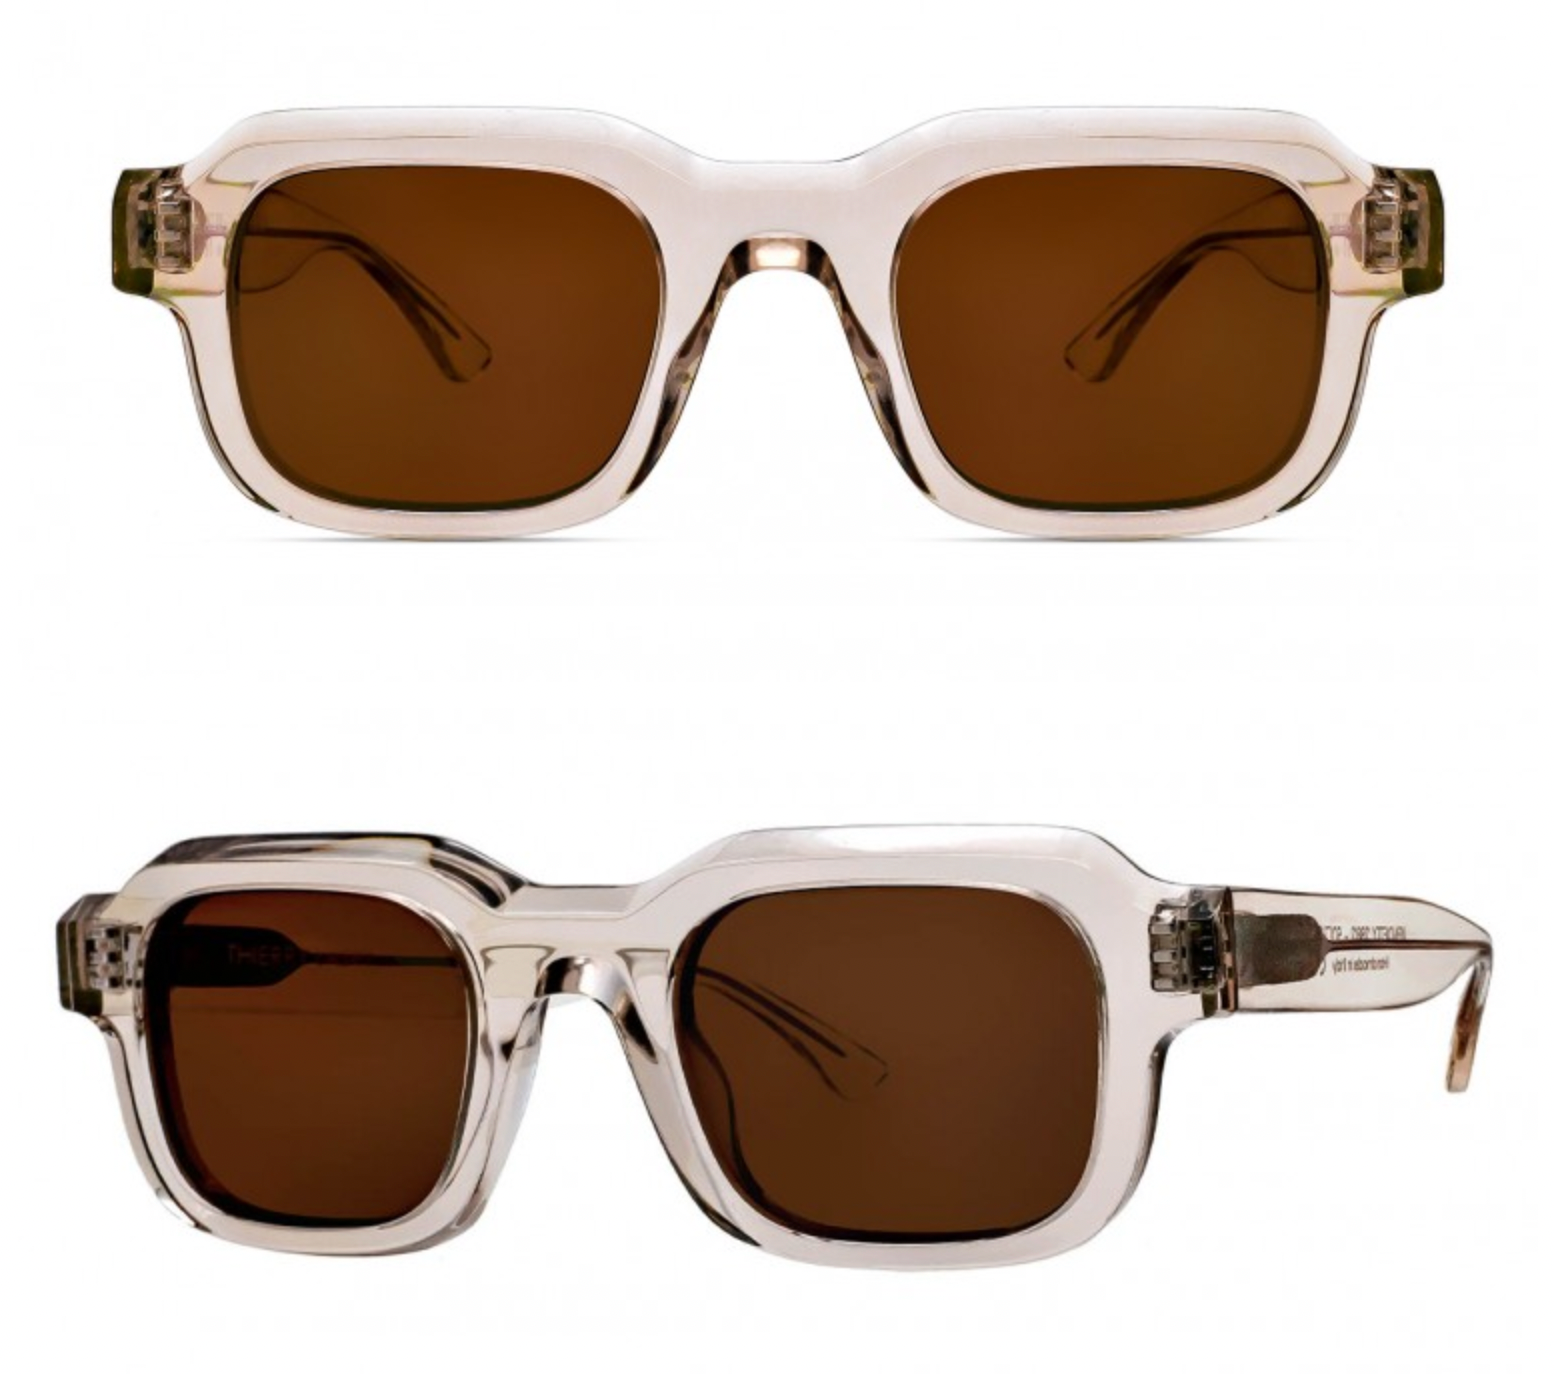 Thierry Lasry - Vendetty